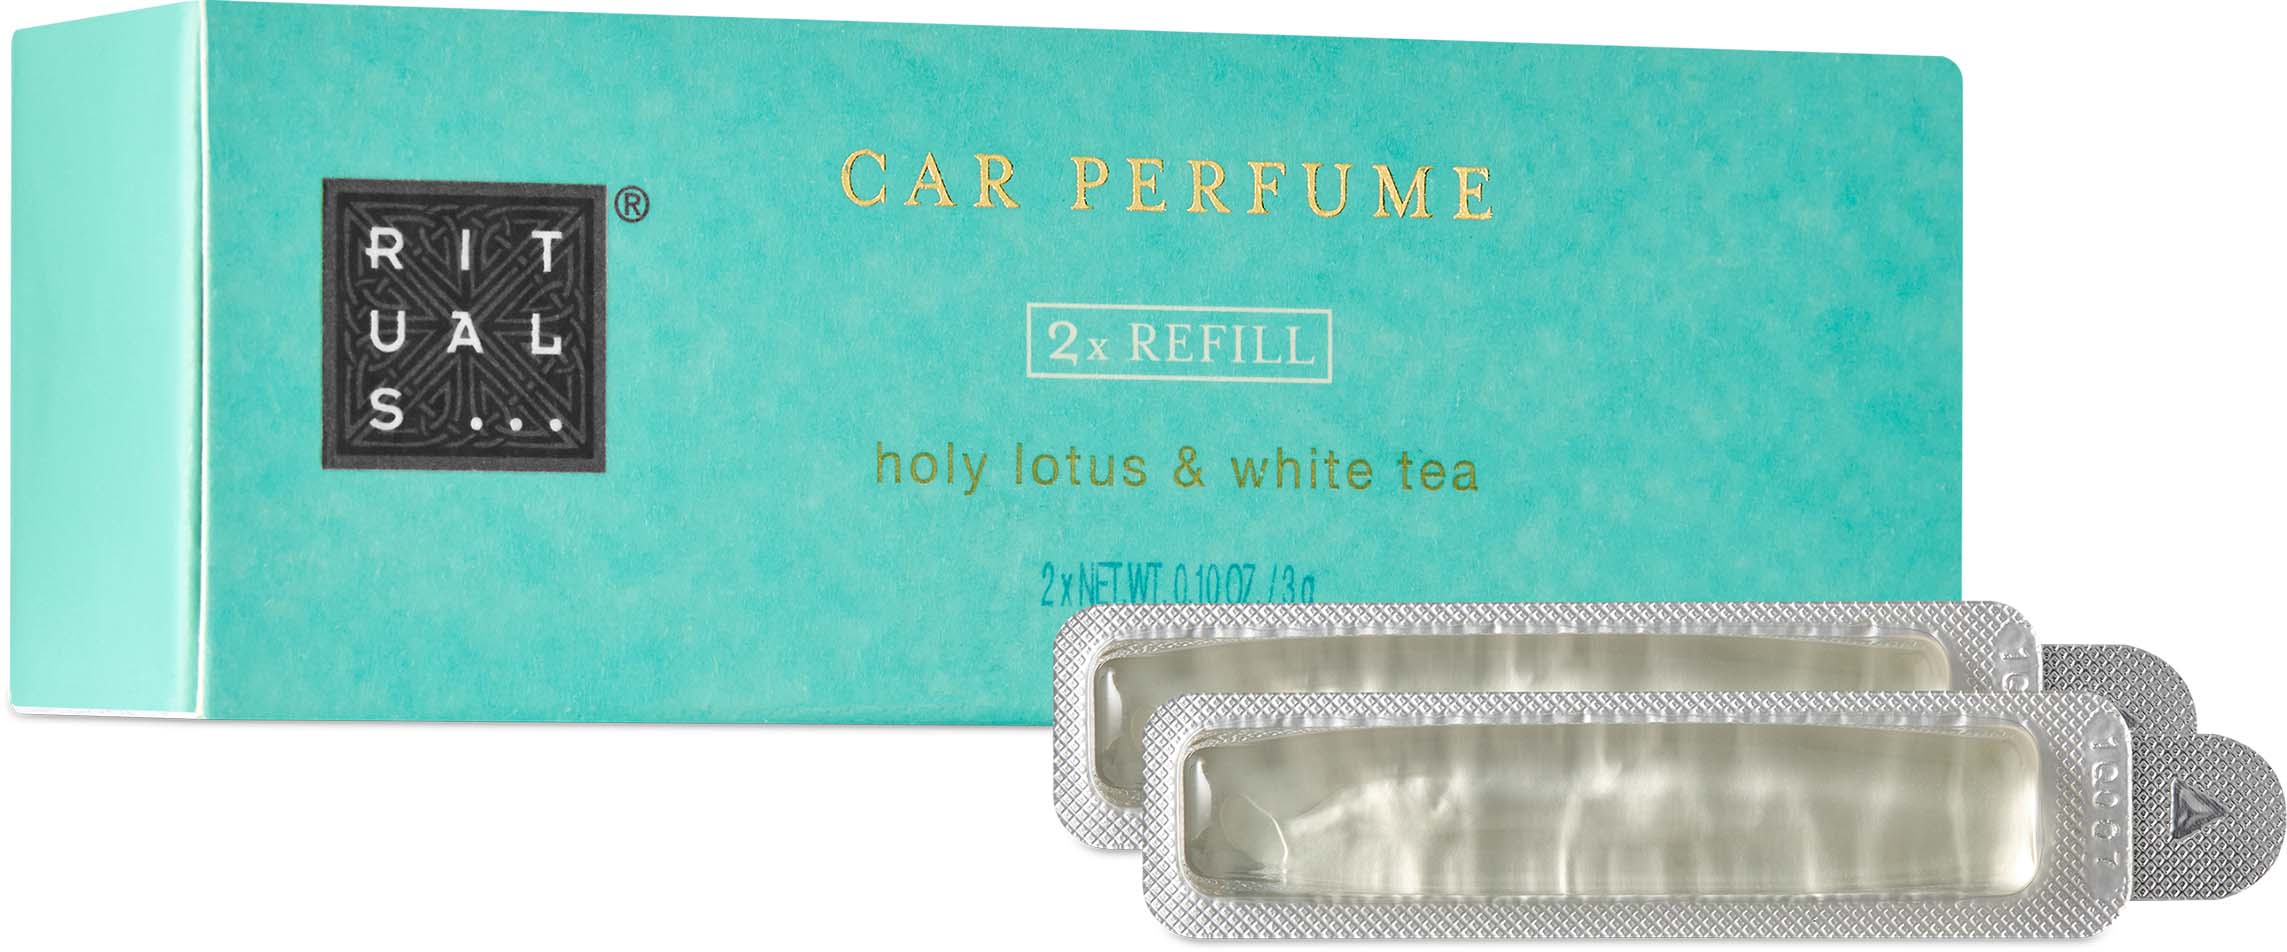 RITUALS Car Perfume Refill More Car Perfume - Life is a Journey - 2 Car  Refills with Aroma of Sweet Orange and Cedar Wood - Car Fragrance Refill  Pack